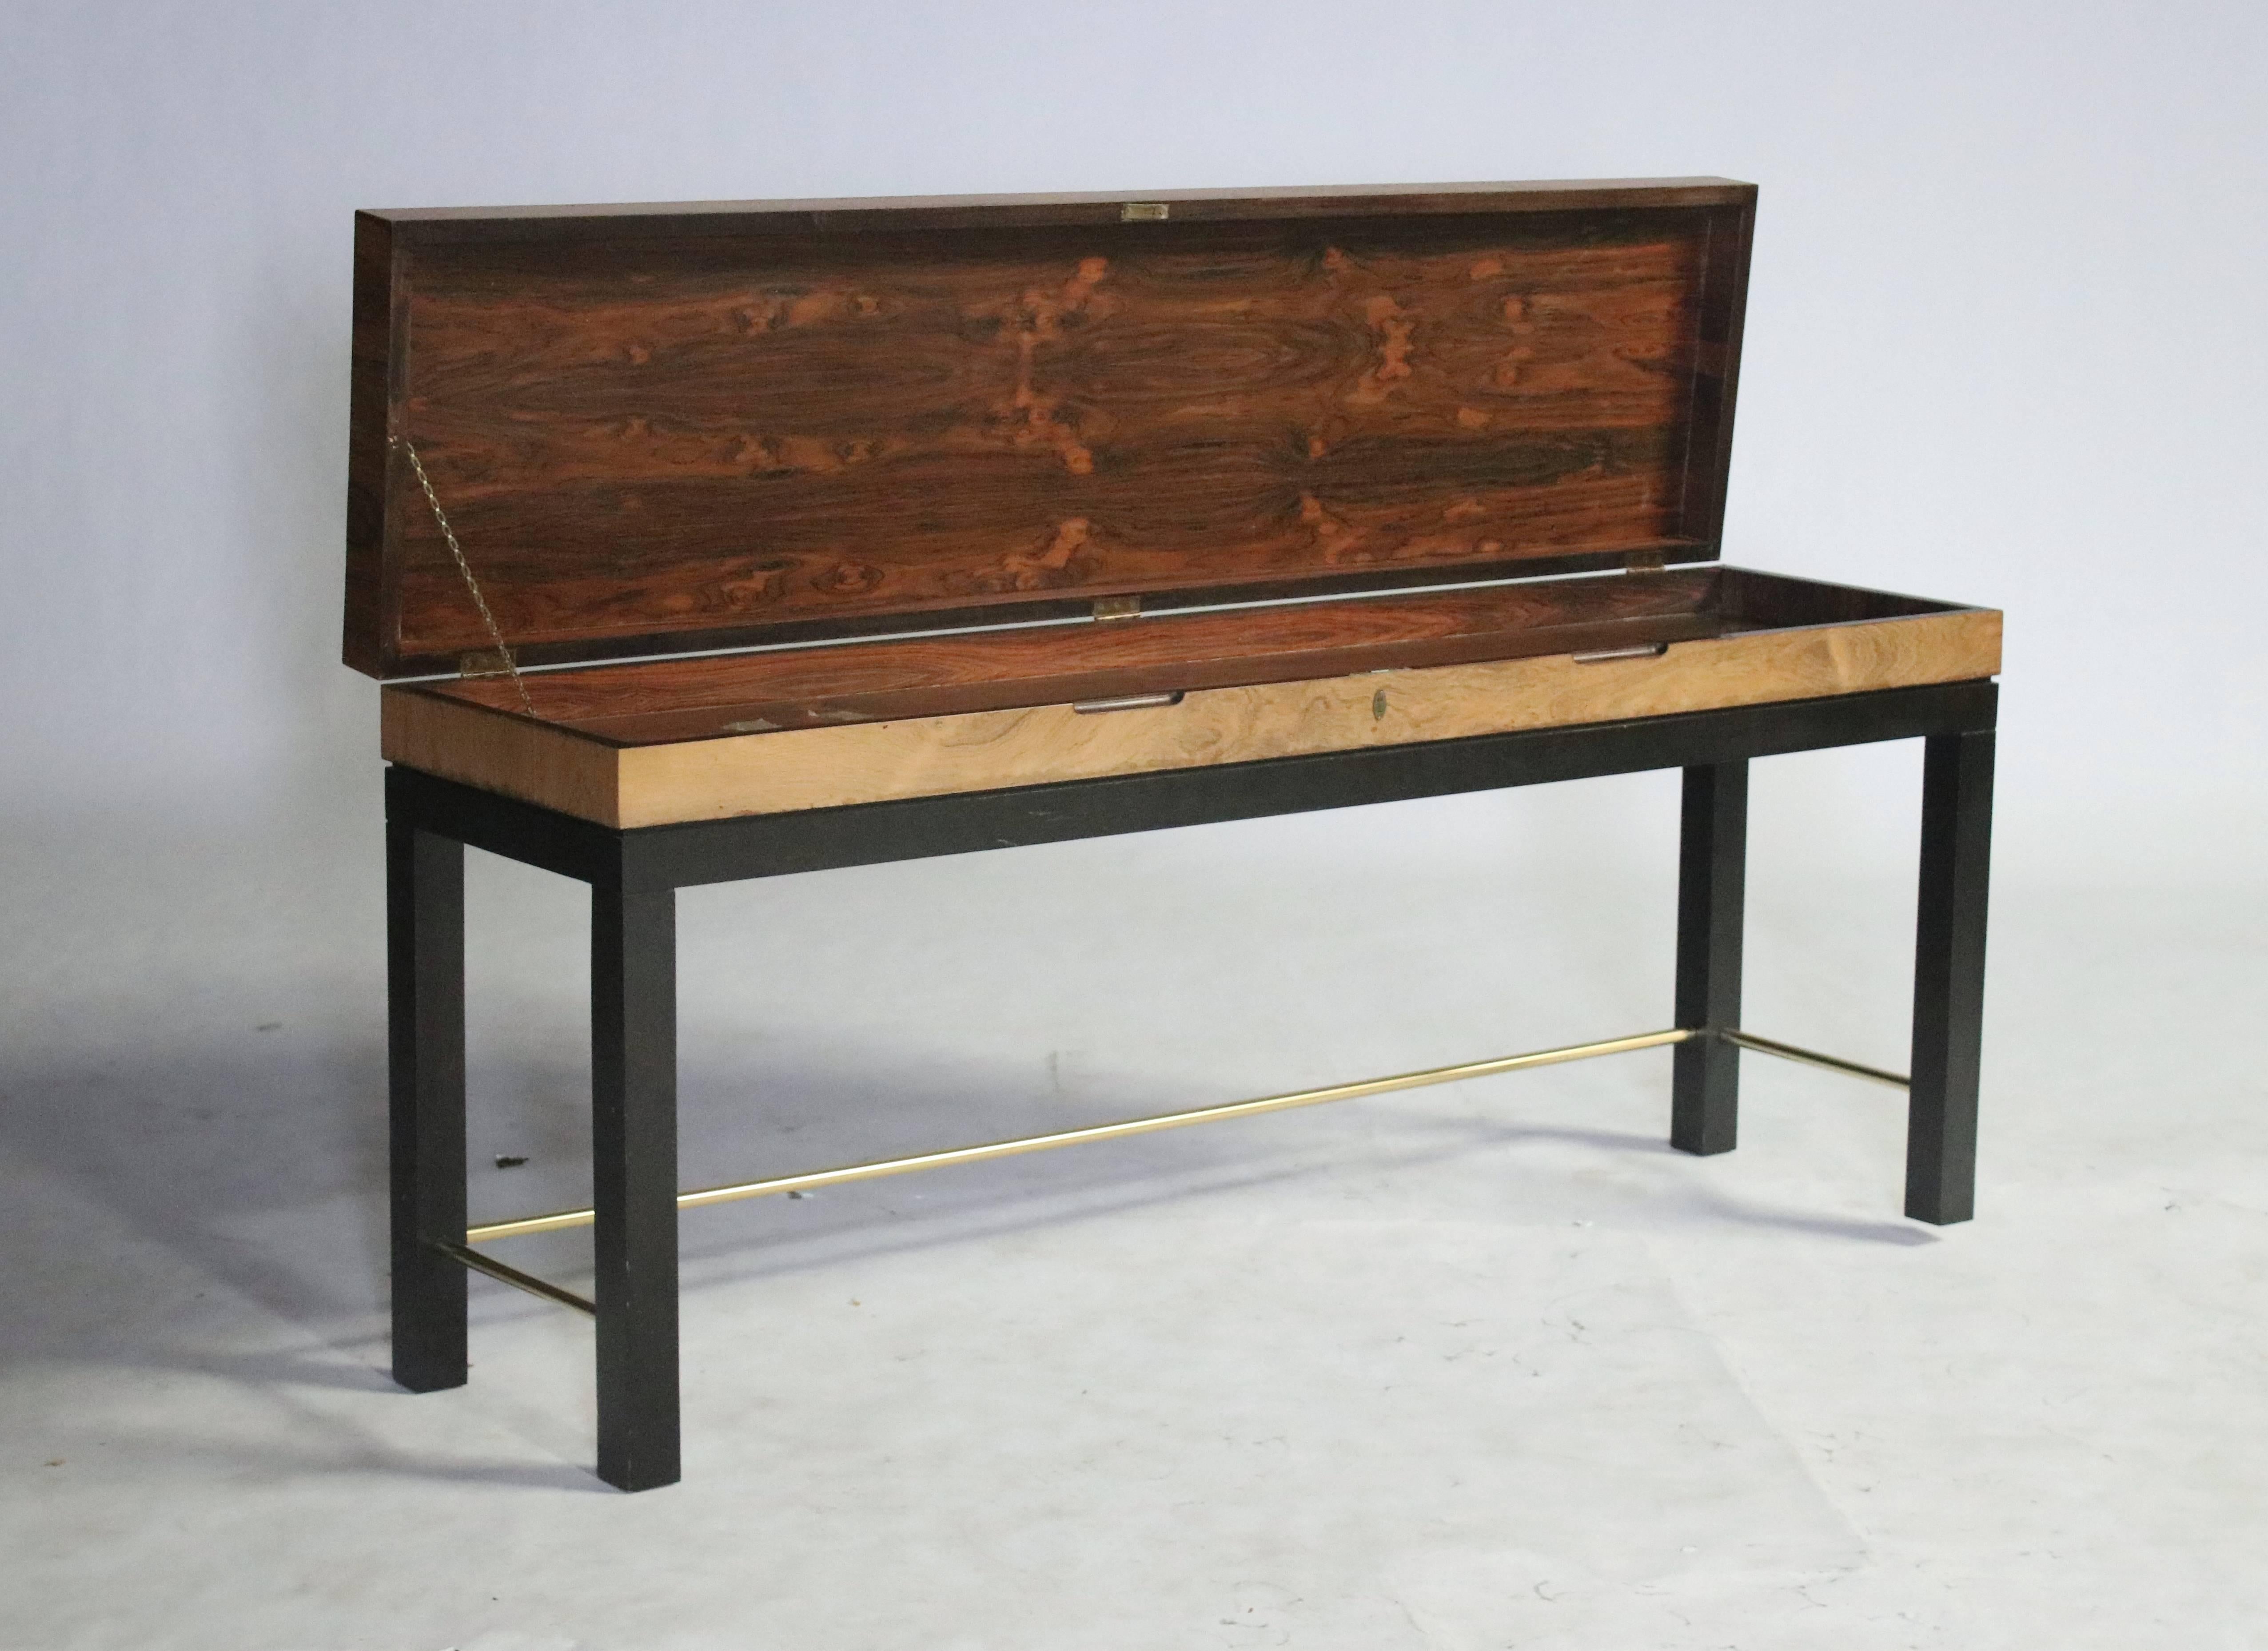 Rosewood console table opens to a sword chest with a beautiful rosewood interior. Chest sits on a parsons style ebony wood frame with brass stretchers in the style of Edward Wormley for Dunbar.